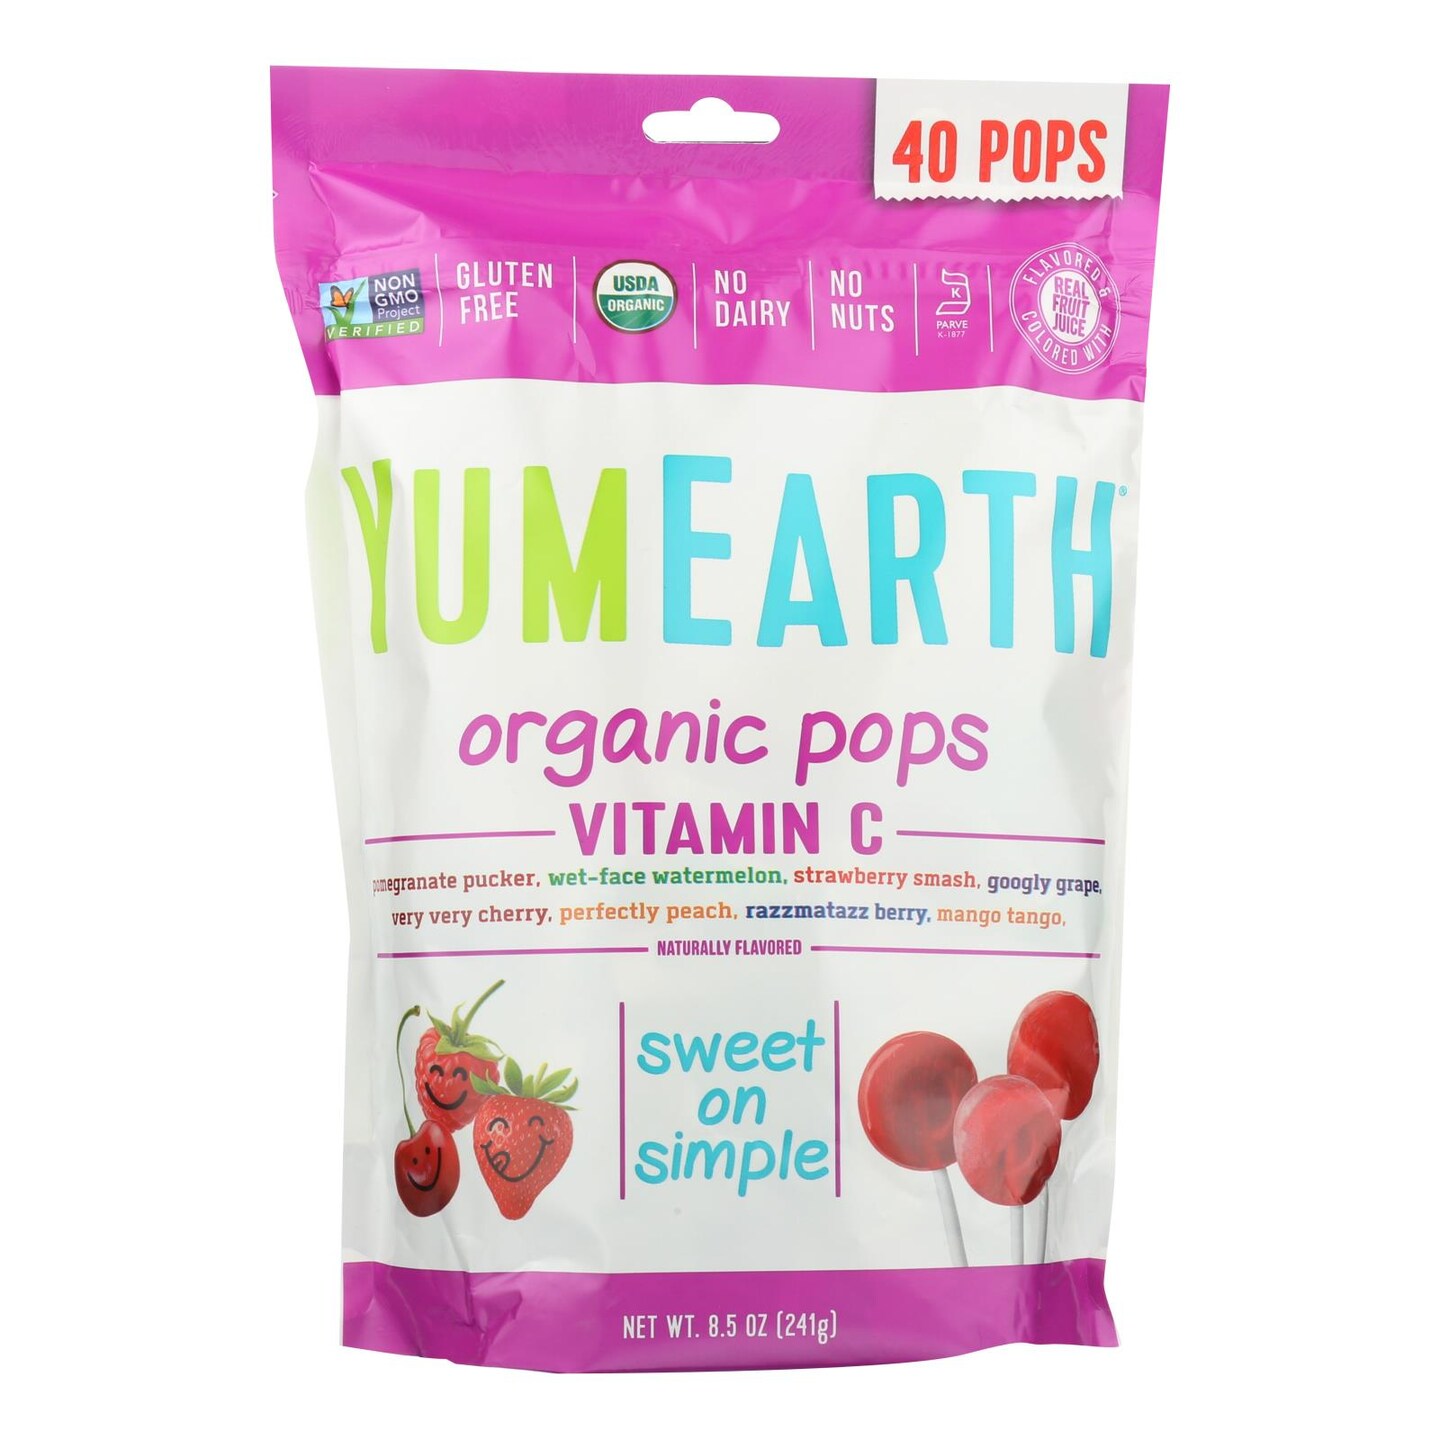 Yumearth Organic Vitamin C Pops Assorted Flavors - Case of 12 - 8.5 OZ